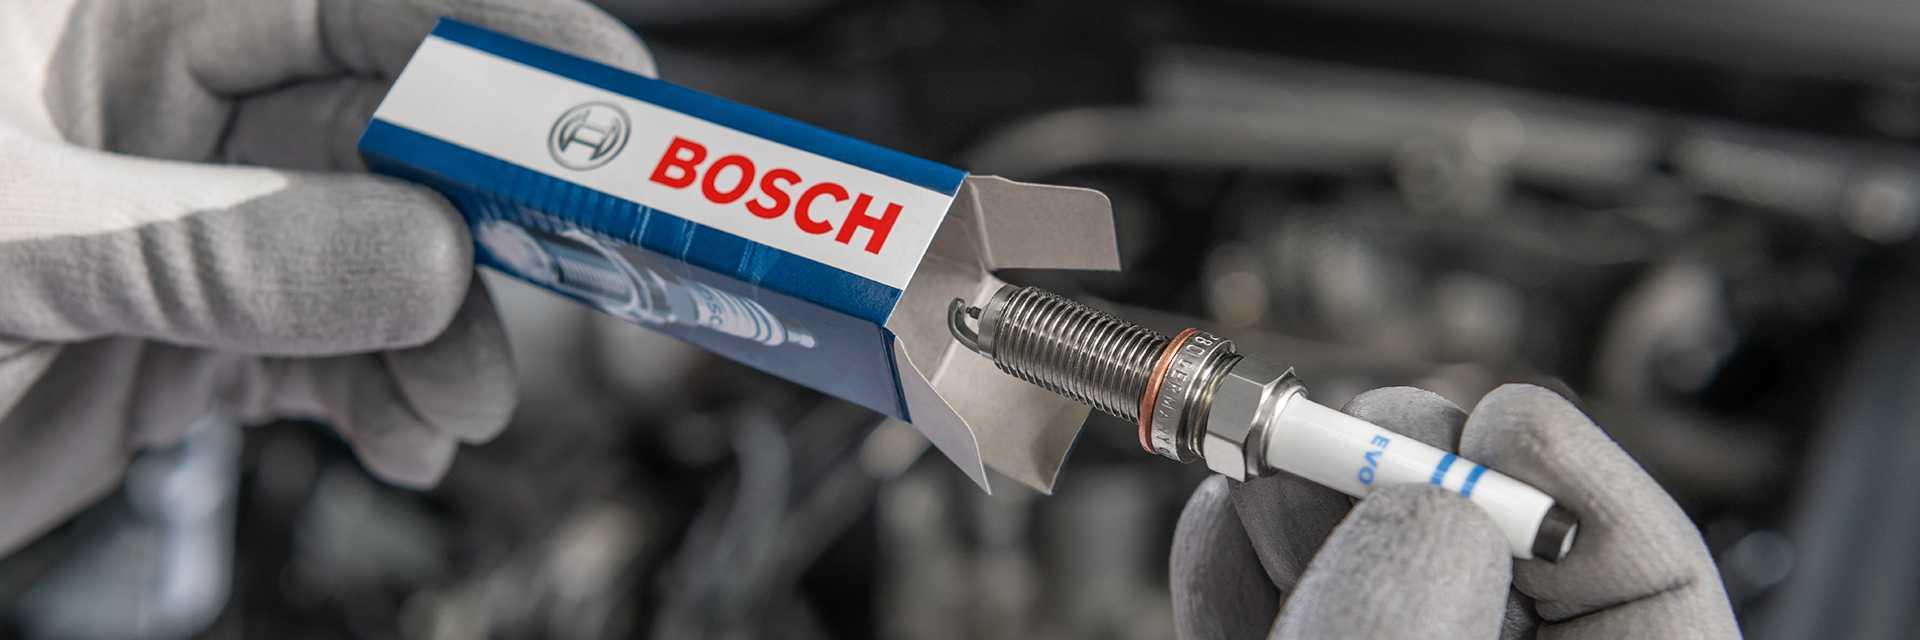 Bosch Auto Service high-quality parts and repairs